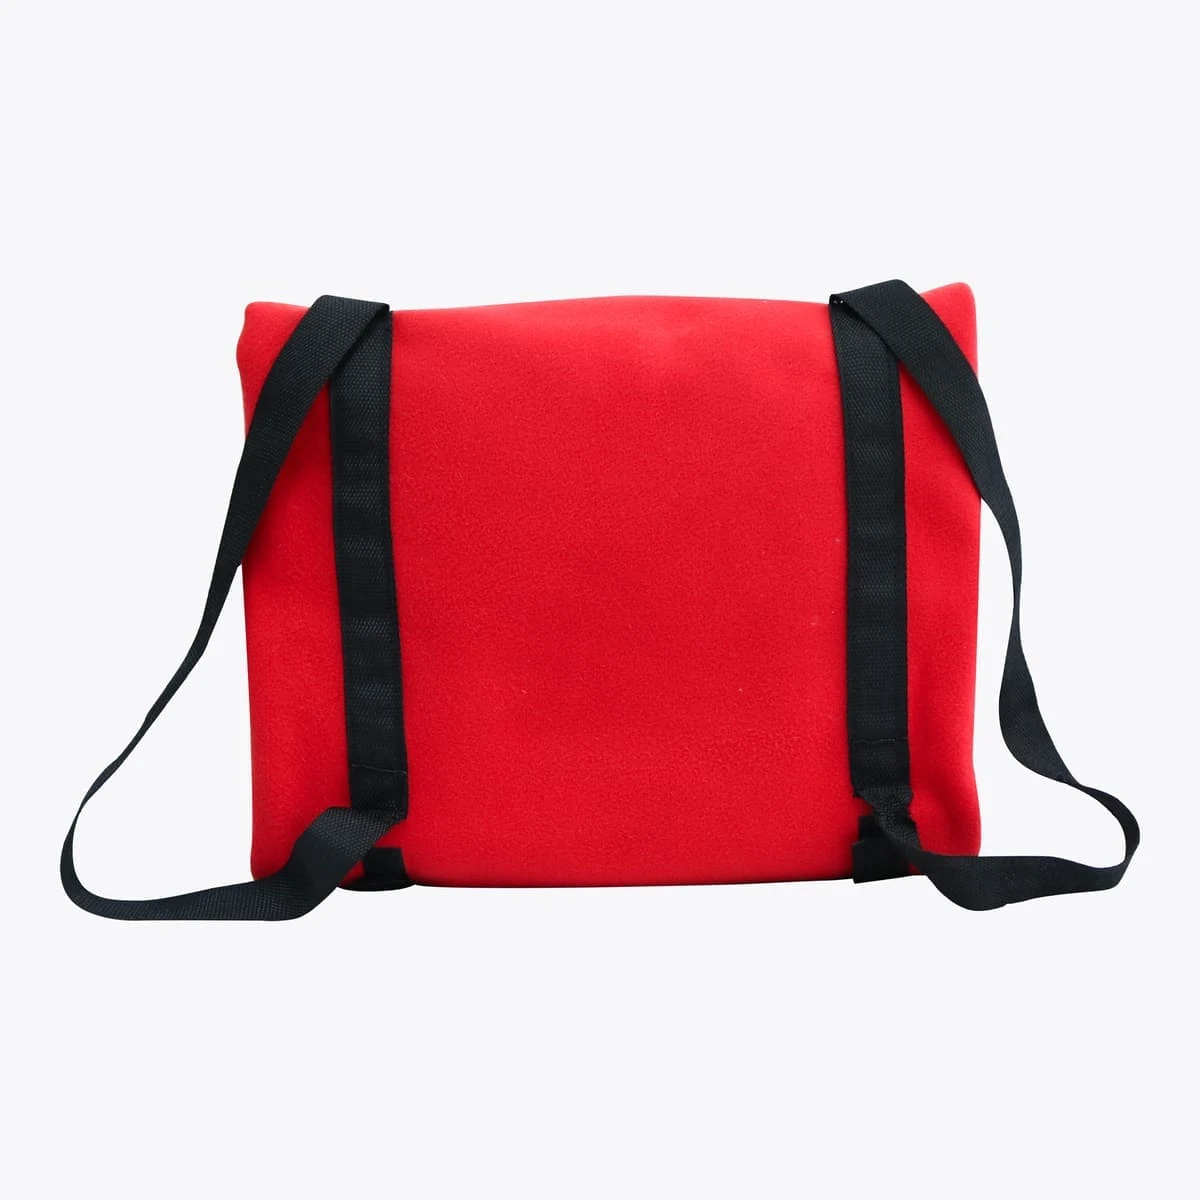 Embroidery Fleece Outdoor Blanket Backpack with Pillow (Red)